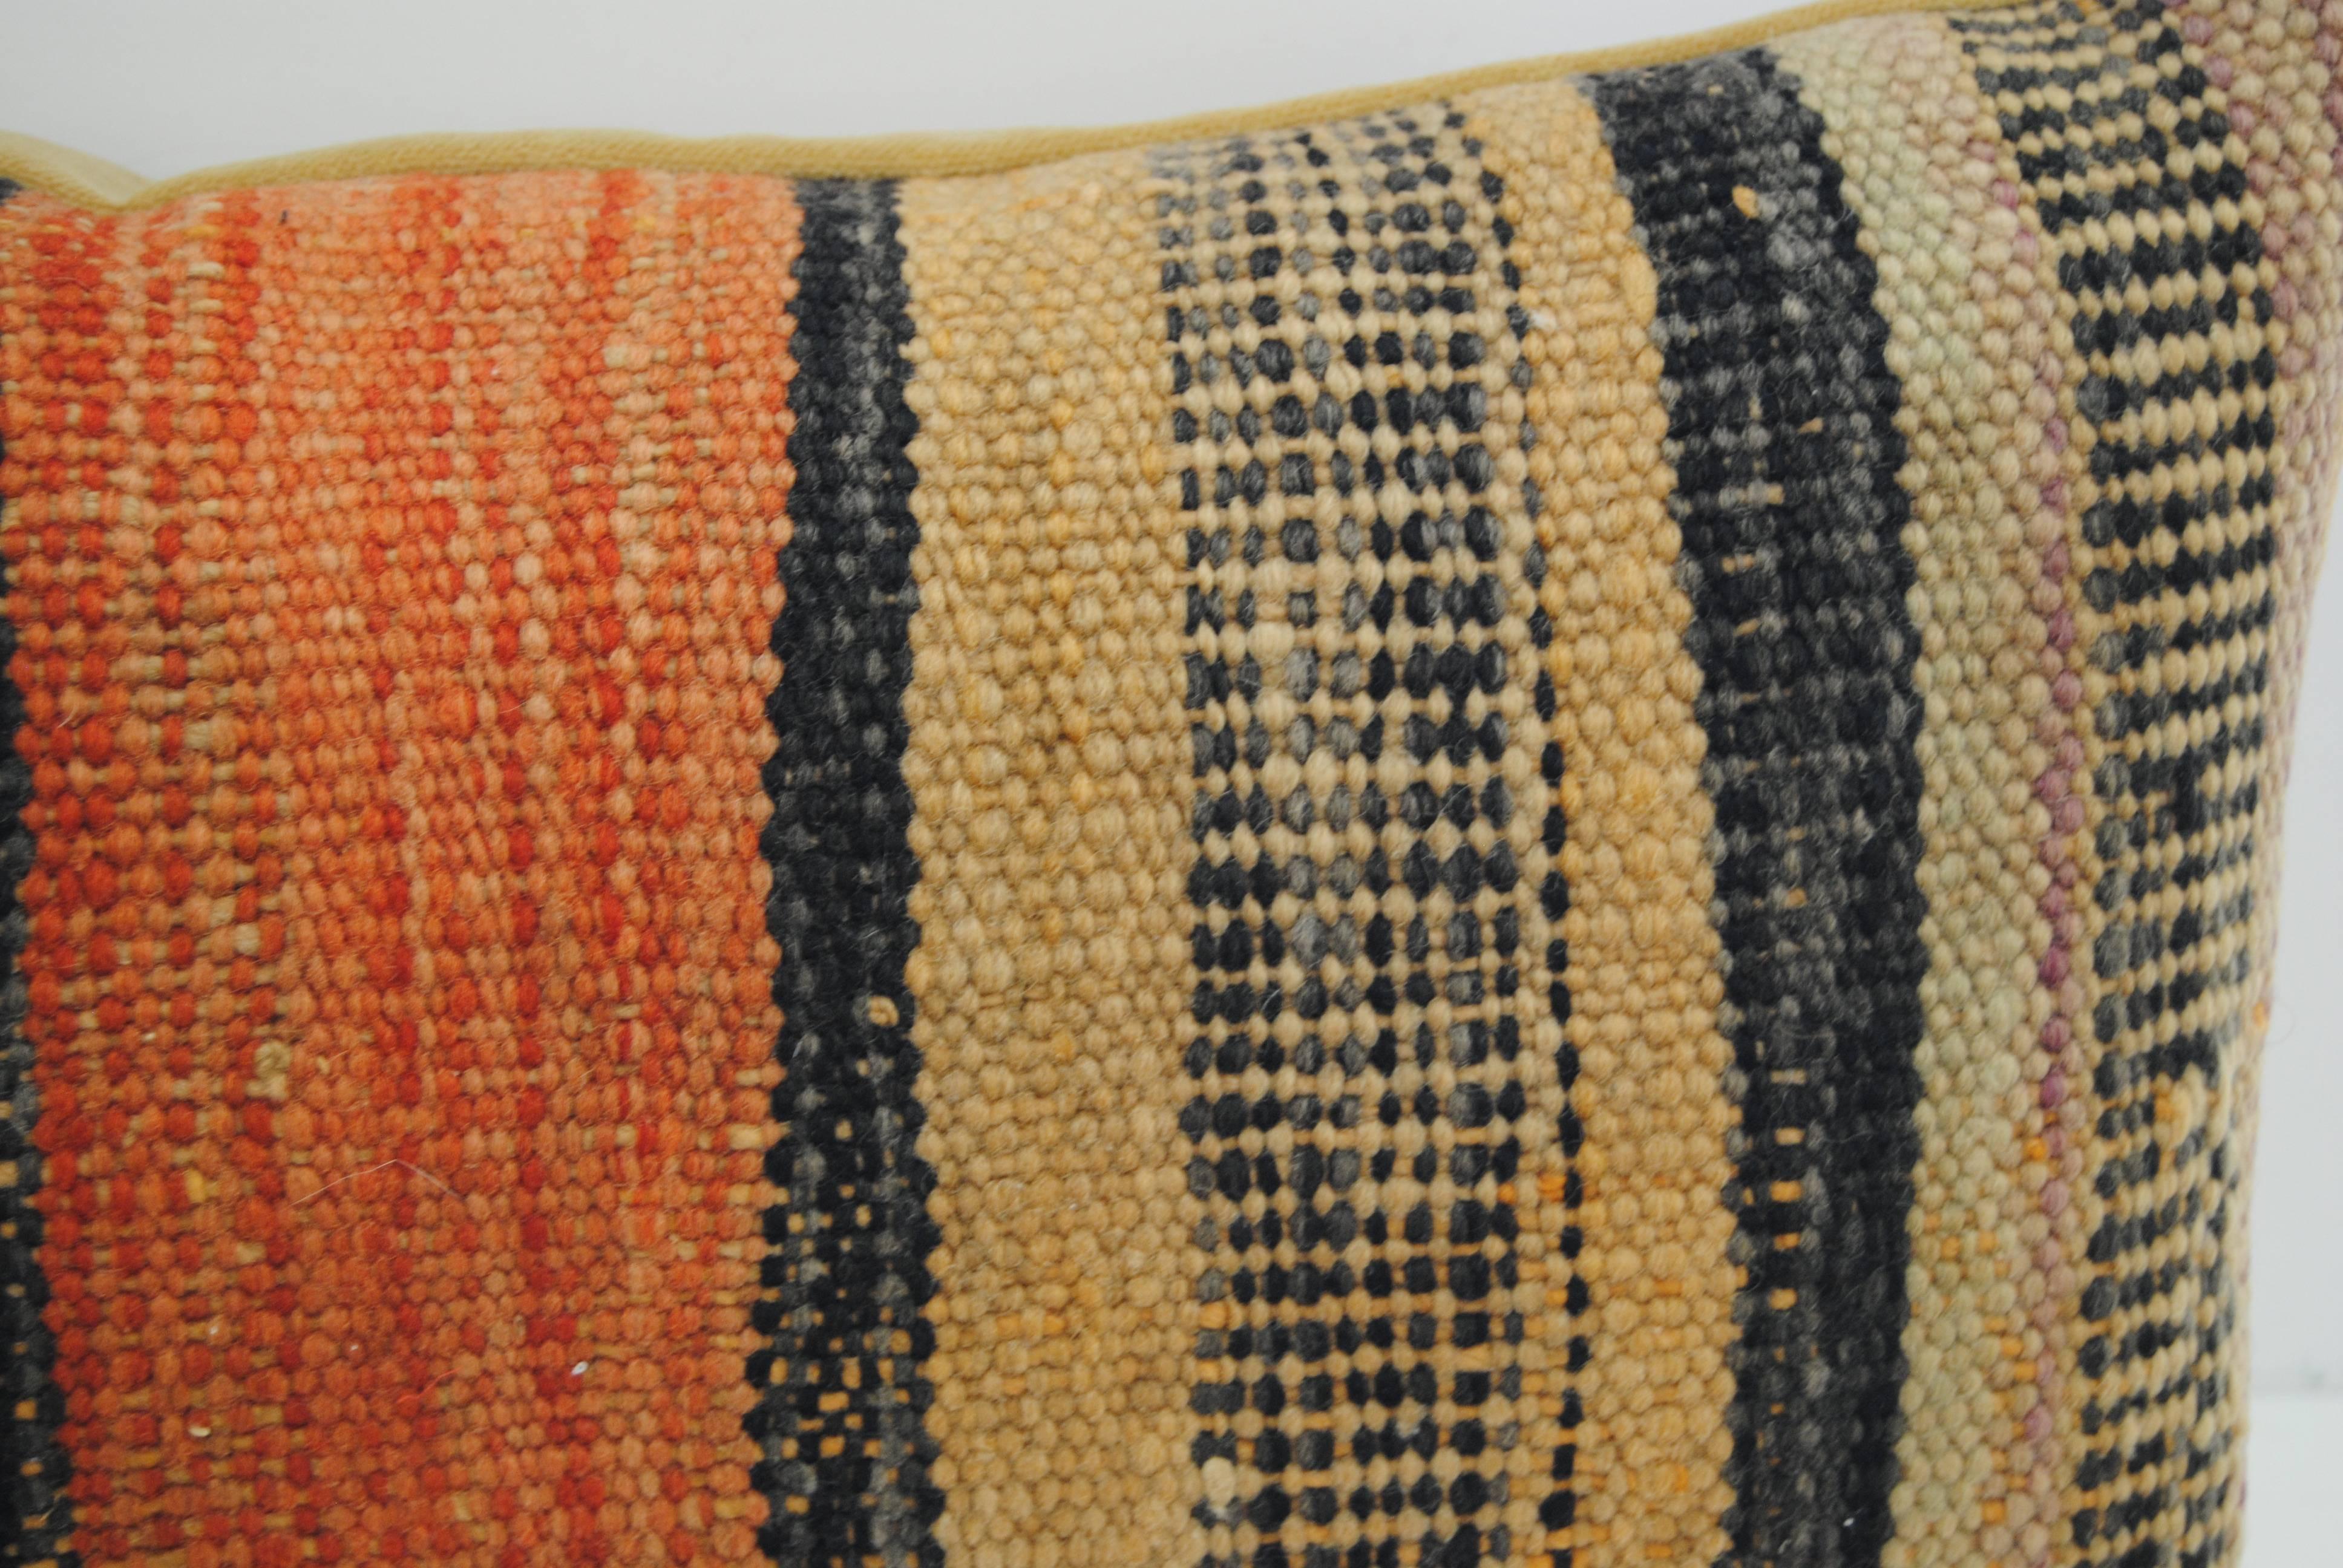 Custom pillow cut from a vintage hand loomed wool Moroccan rug from the Atlas Mountains. Wool is soft and lustrous with all natural dyes. Pillow is backed in a soft camel velvet, filled with an insert of 50/50 down and feathers and hand-sewn closed.